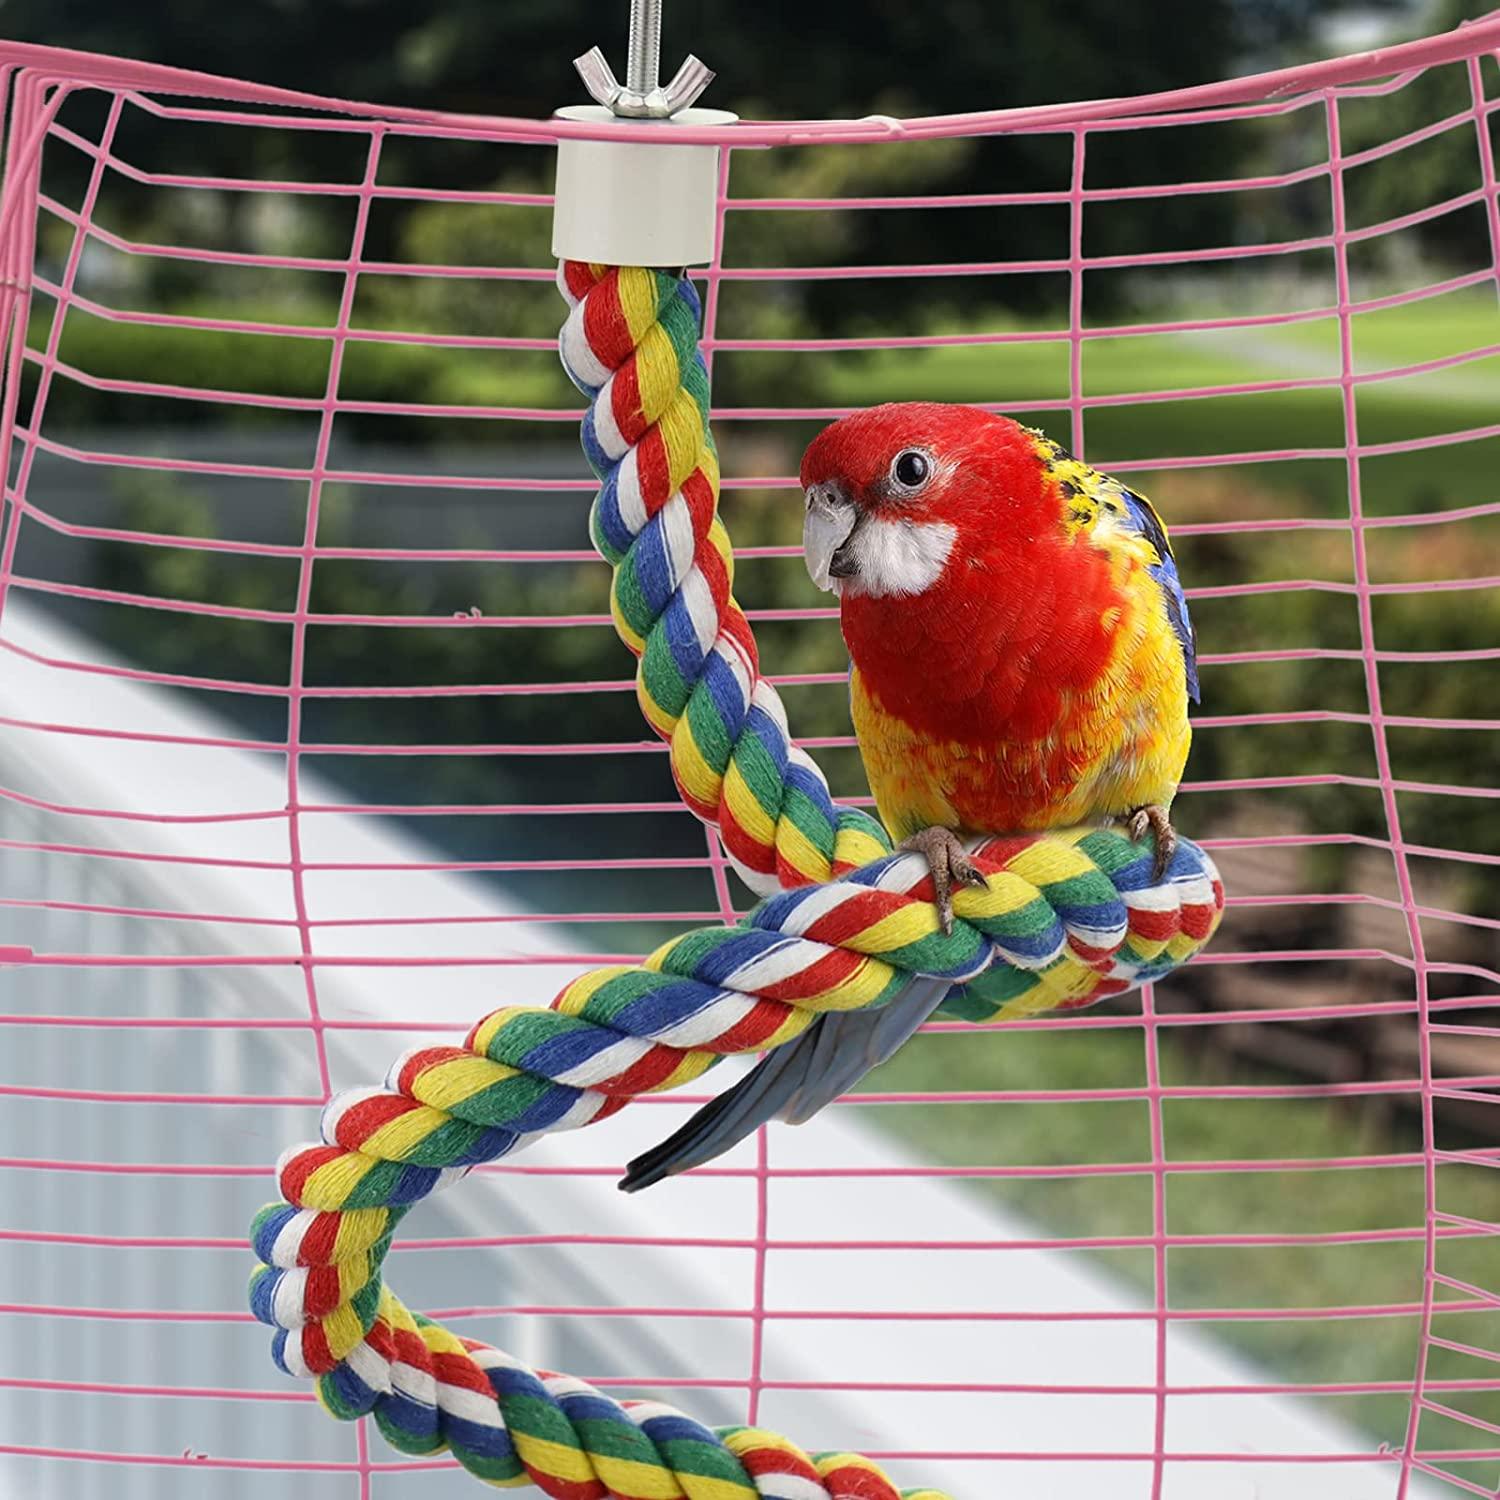 Bird Rope Perch for Parrots, Cockatiels, Parakeets, Budgie Cages Comfy  Birds Colorful Rope Perches Toy 41inch metal nut